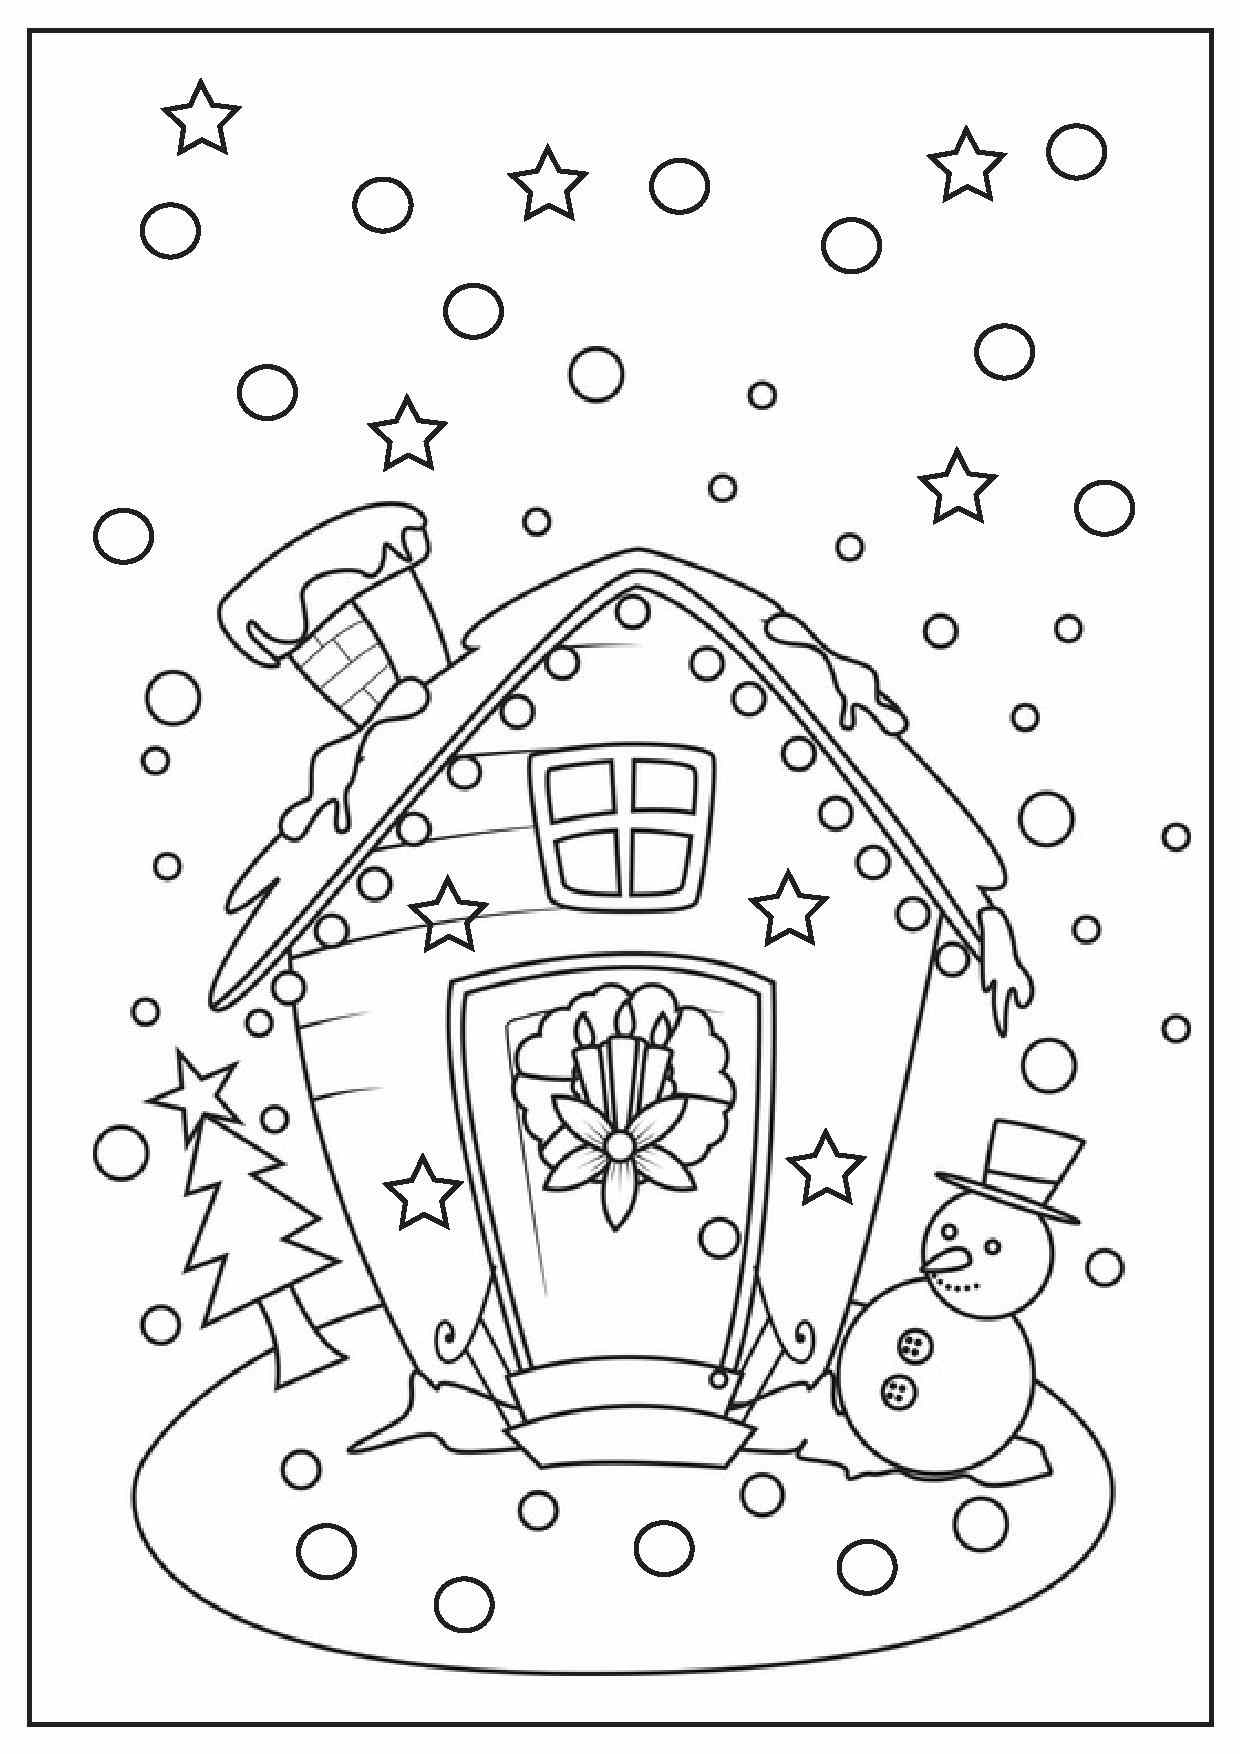 6 Best Free Printable Christmas Activity Pages